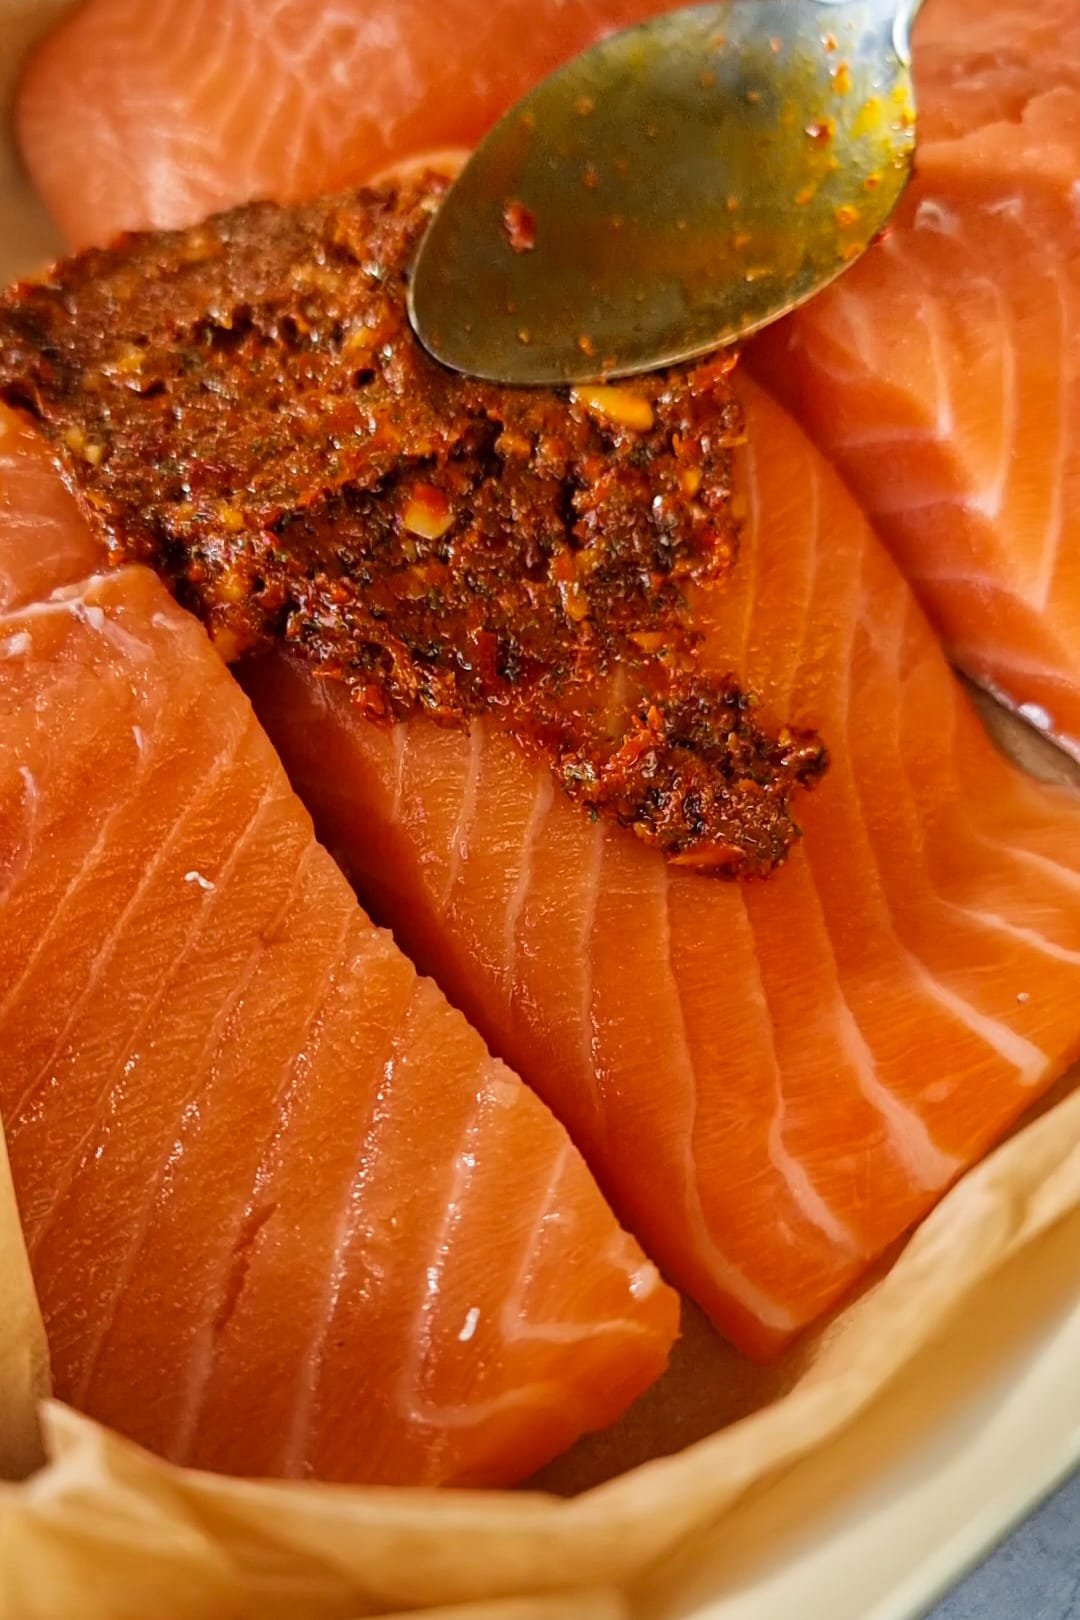 Start by mixing the oil with minced garlic, sweet pepper paste and all the spices, dried dill, pup biber, turmeric, black pepper and salt to form a paste.  Line up the salmon on a baking tray and spread the paste on top of the salmon.